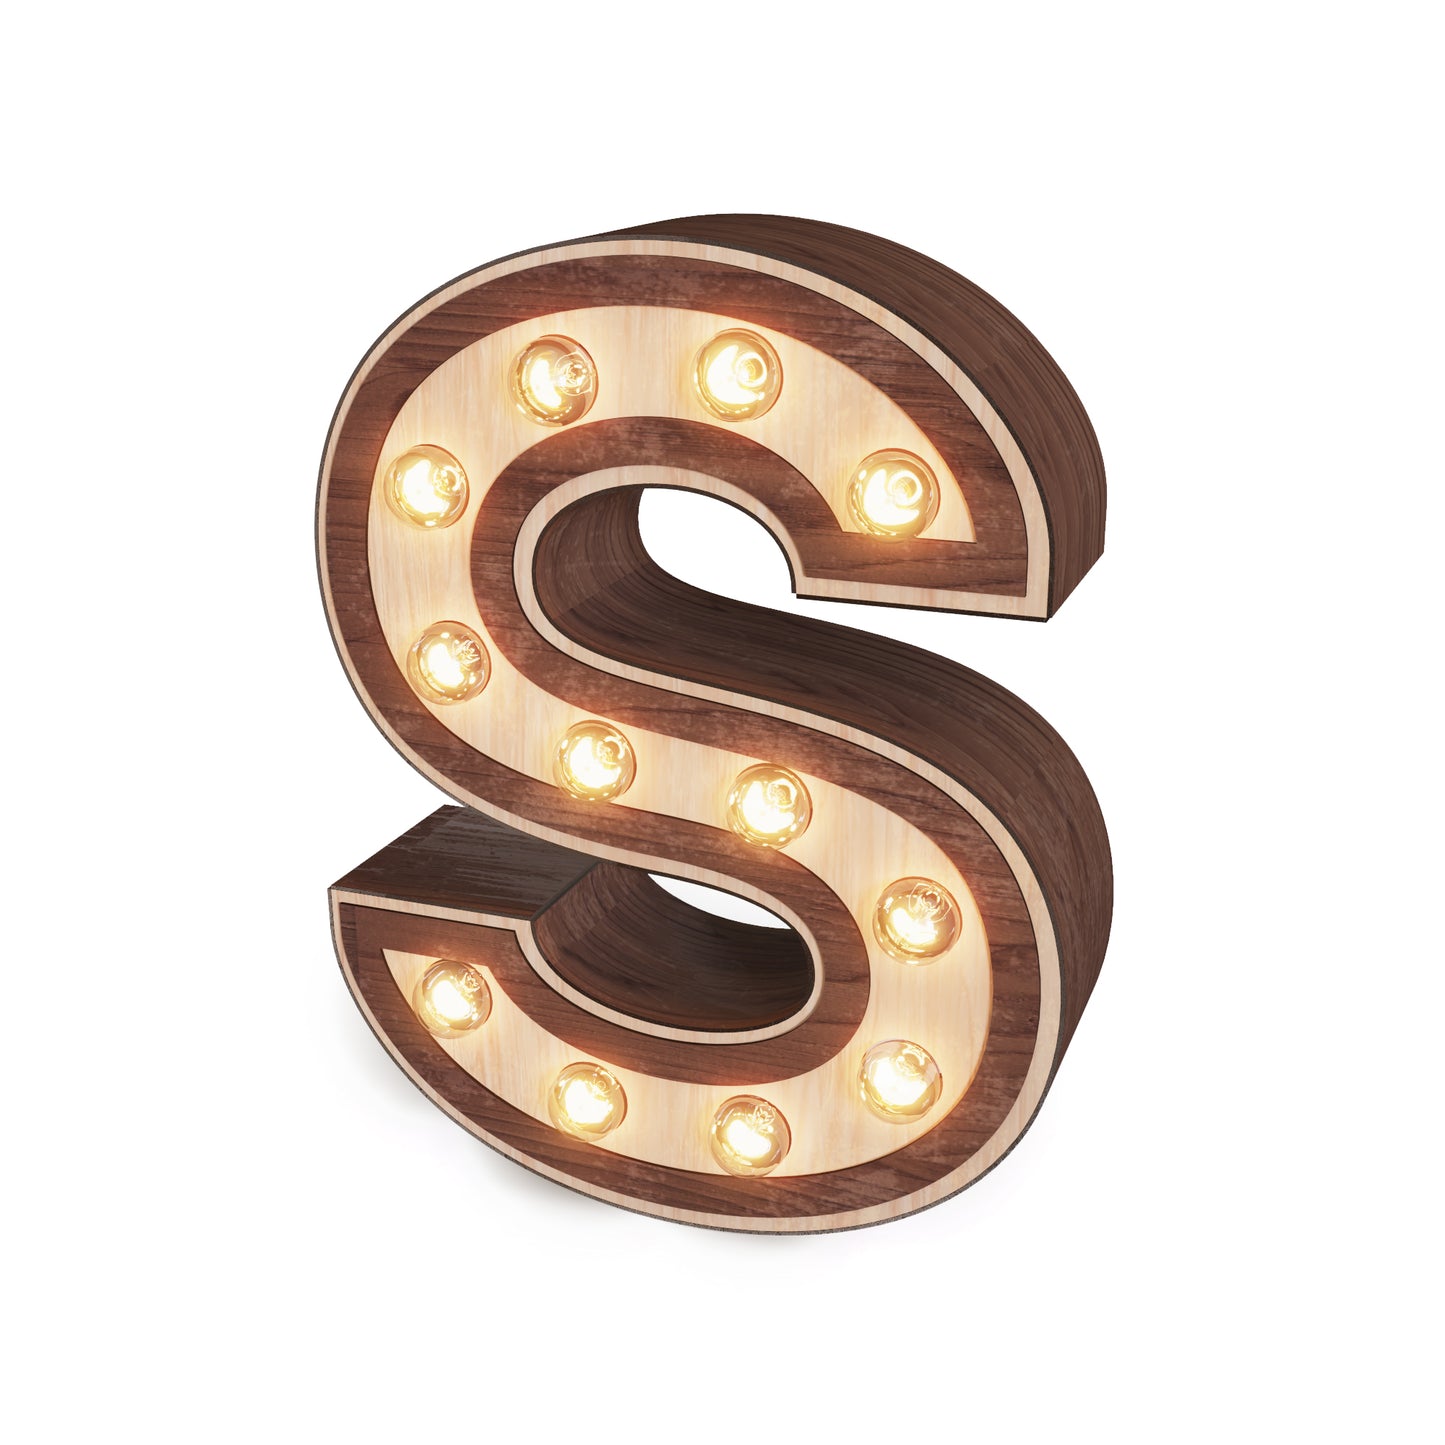 Light-up Marquee Letter Display "S"